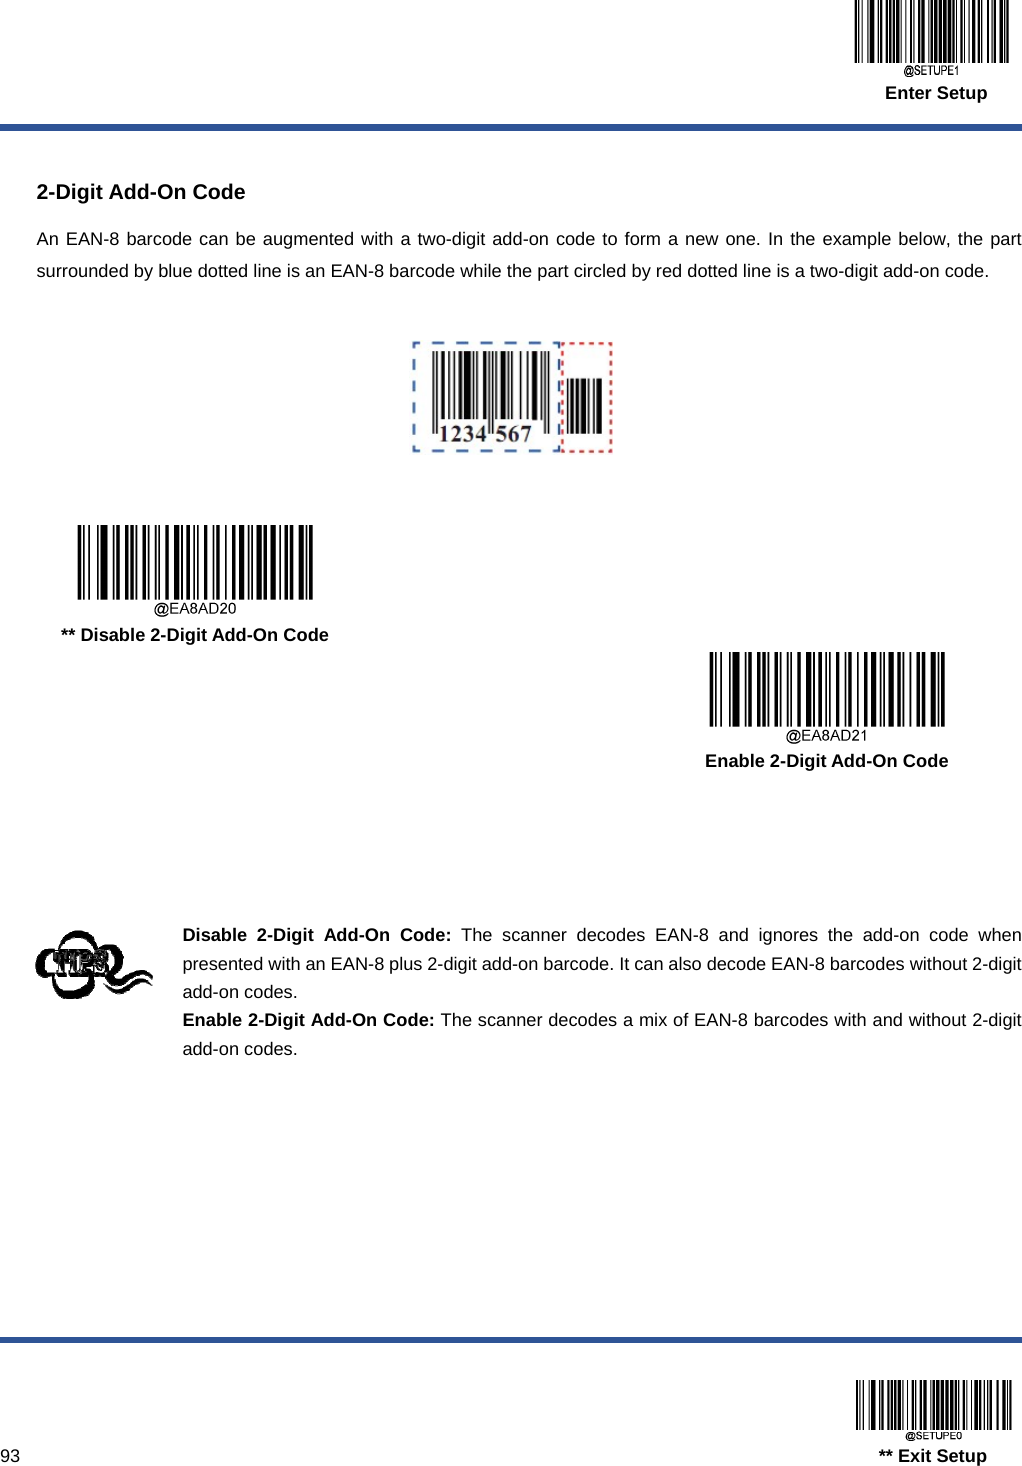  Enter Setup  93                                                                                  ** Exit Setup  2-Digit Add-On Code An EAN-8 barcode can be augmented with a two-digit add-on code to form a new one. In the example below, the part surrounded by blue dotted line is an EAN-8 barcode while the part circled by red dotted line is a two-digit add-on code.        ** Disable 2-Digit Add-On Code      Enable 2-Digit Add-On Code     Disable 2-Digit Add-On Code: The scanner decodes EAN-8 and ignores the add-on code when presented with an EAN-8 plus 2-digit add-on barcode. It can also decode EAN-8 barcodes without 2-digit add-on codes. Enable 2-Digit Add-On Code: The scanner decodes a mix of EAN-8 barcodes with and without 2-digit add-on codes. 